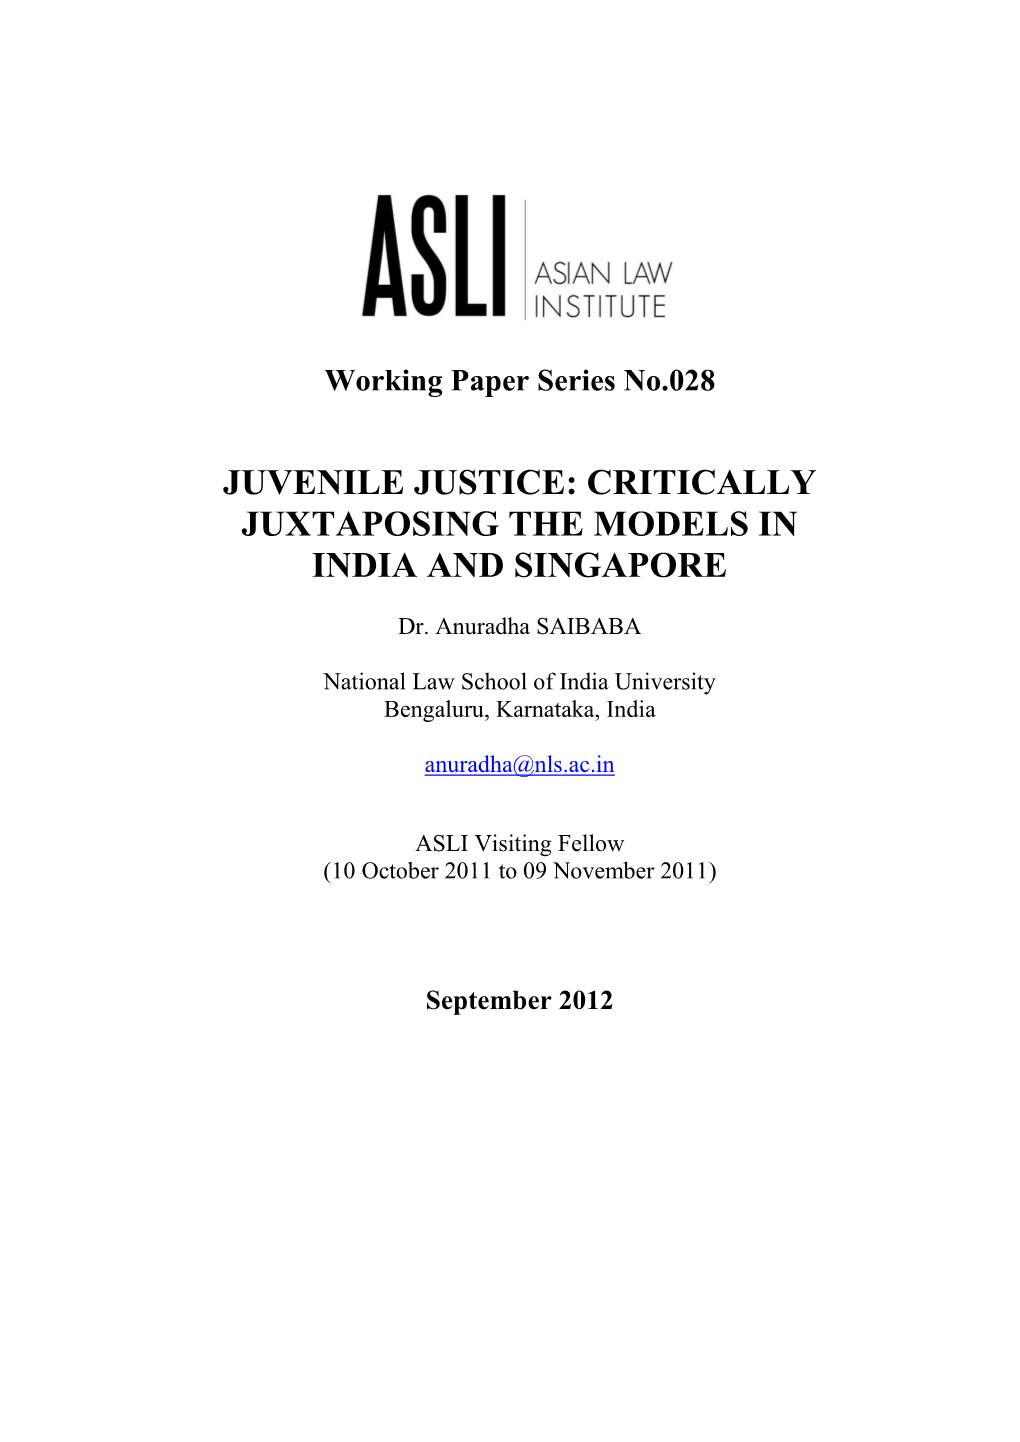 Juvenile Justice: Critically Juxtaposing the Models in India and Singapore